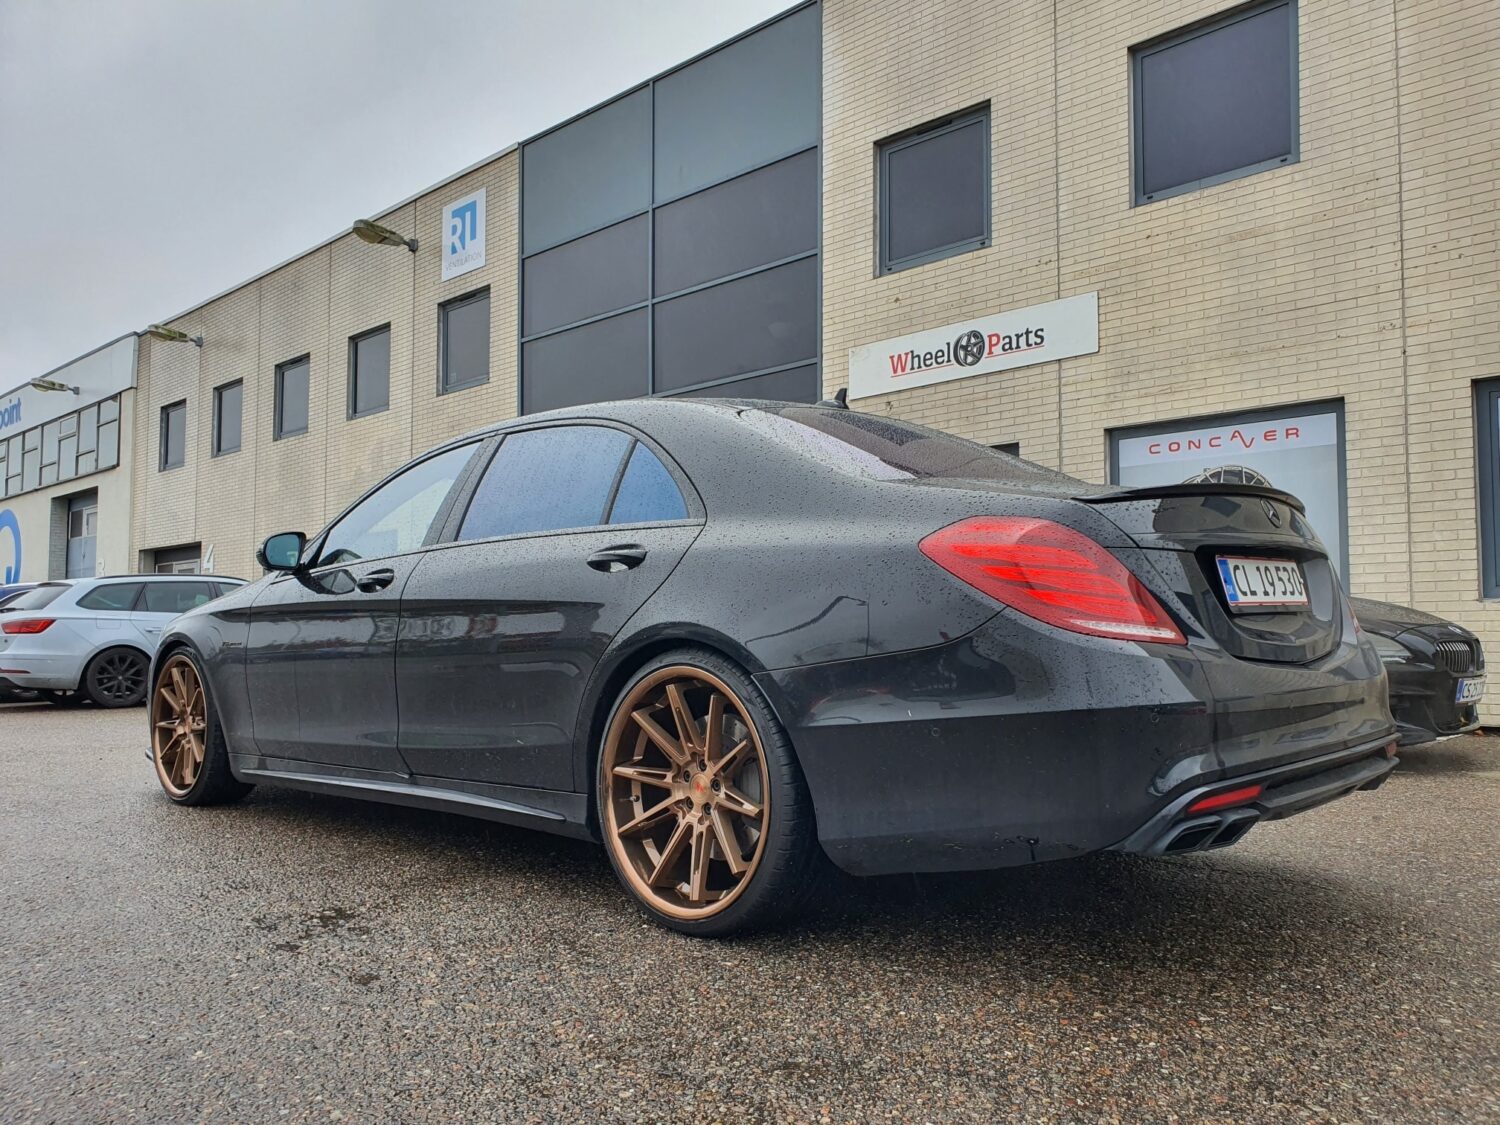 Mercedes-Benz S Class W222 with 22×9 and 22×10.5-inch Ferrada CM2